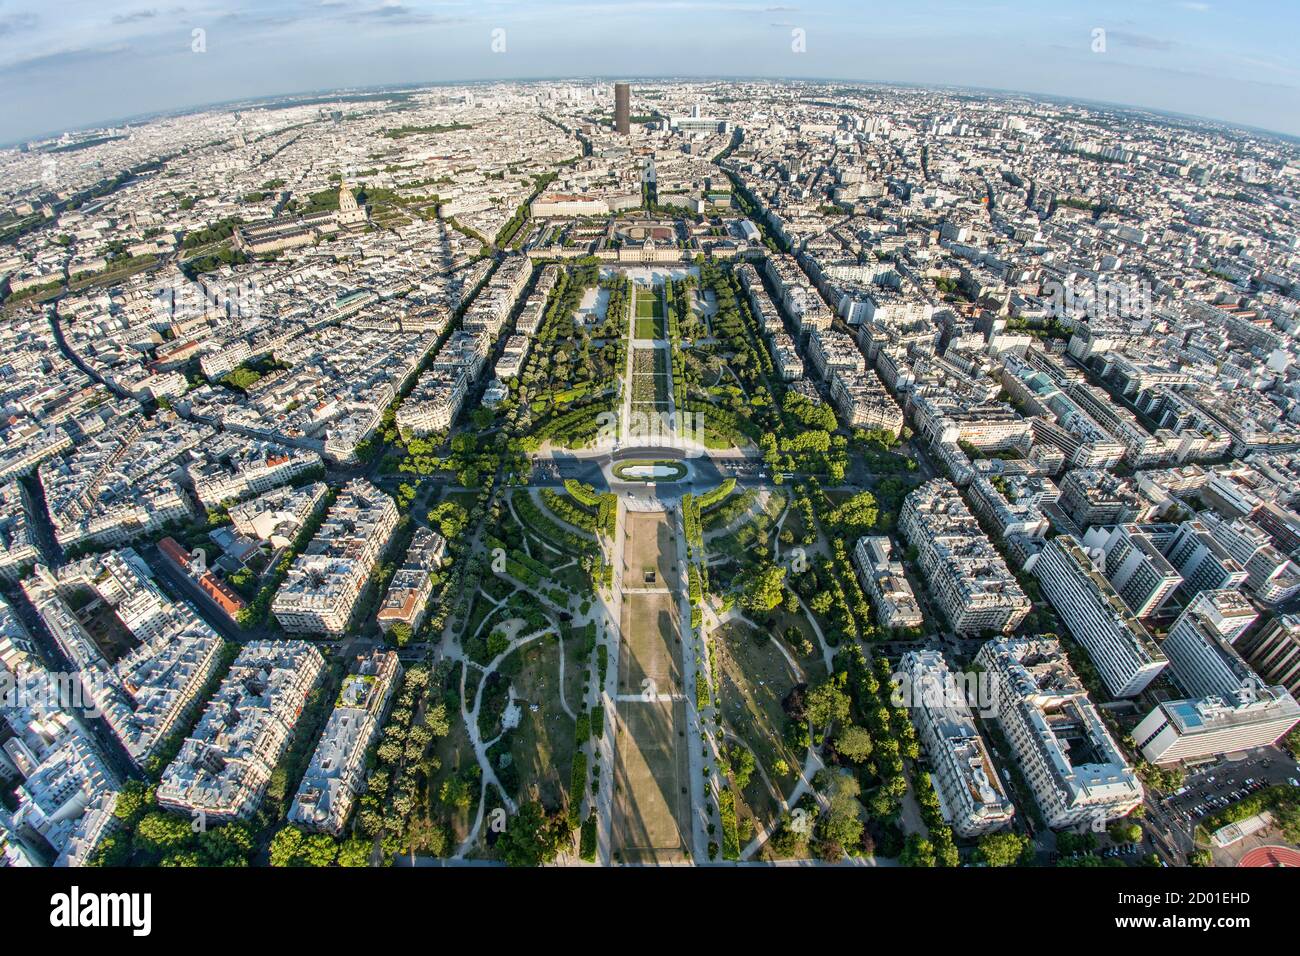 View across Paris from the top of the Eiffel Tower. Stock Photo